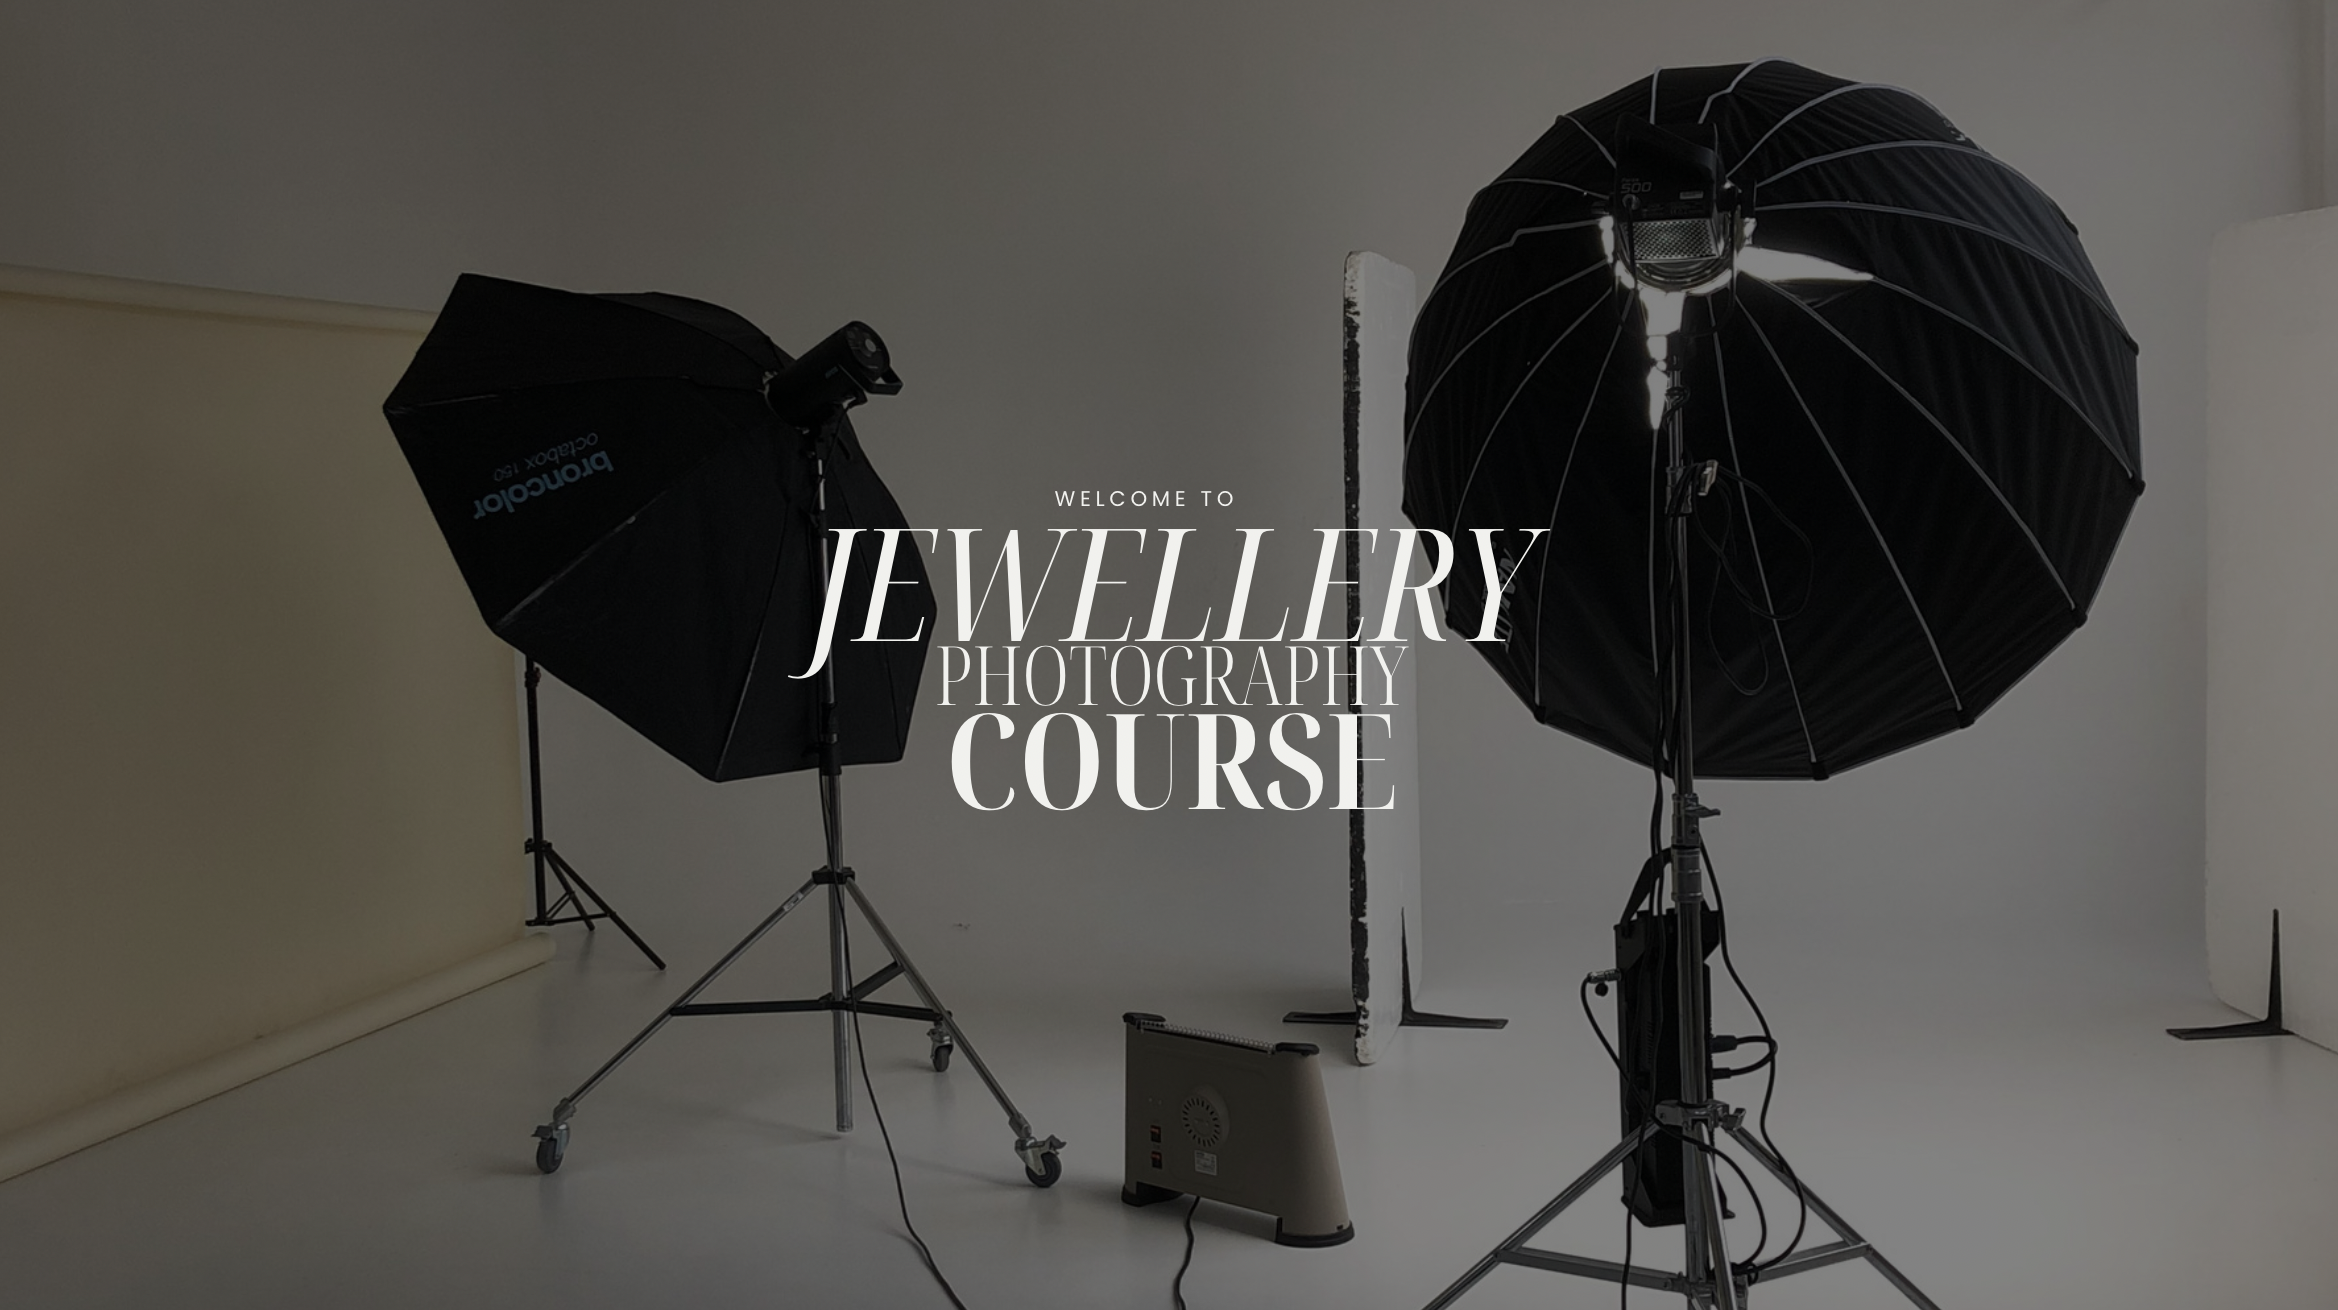 Jewellery Photography Course, How To Photograph Jewellery At Home, Best Jewelry Photography Course, Photograph Jewelry At Home, Chocianaite, Jewellery Photographer, Jewellery Photography, Best Jewellery Photographer UK